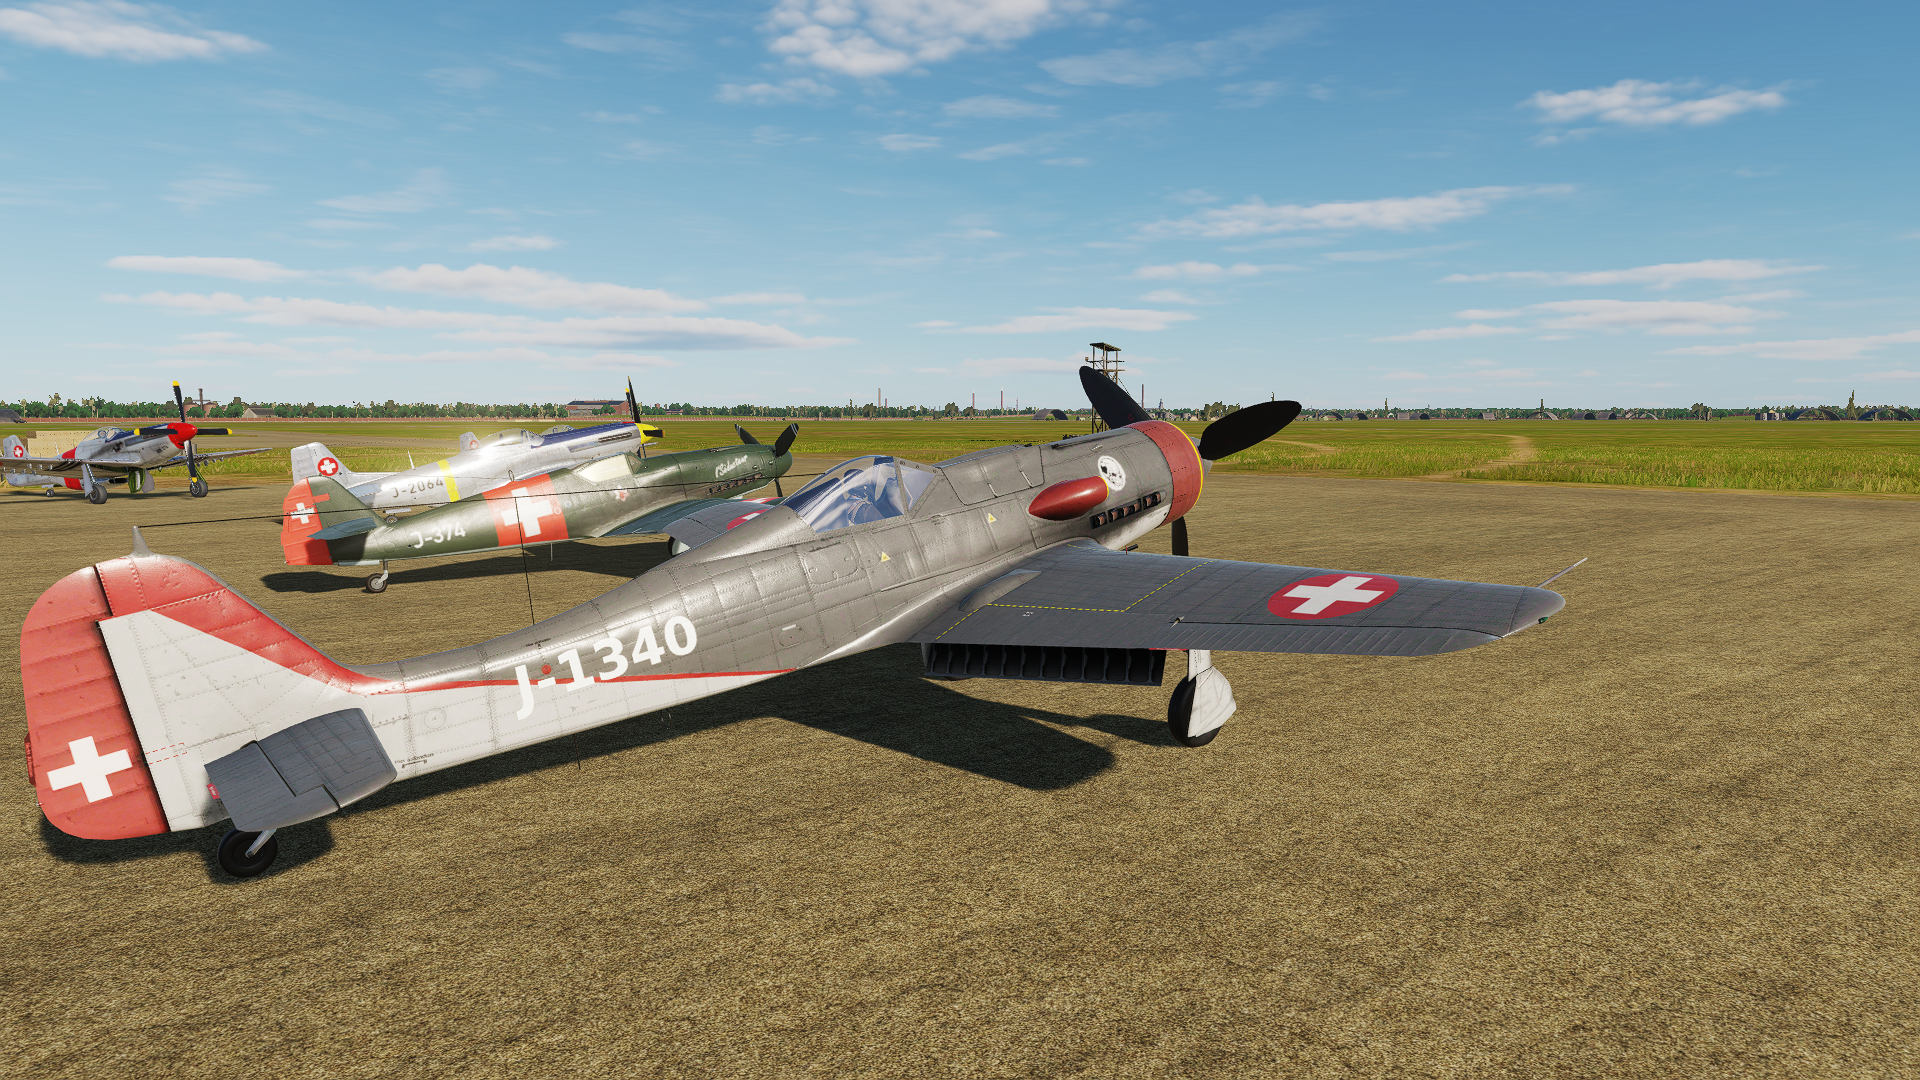 Swiss Air Force Fw 190 D-9 Dora J-1340 (reissued from Col.Boob)